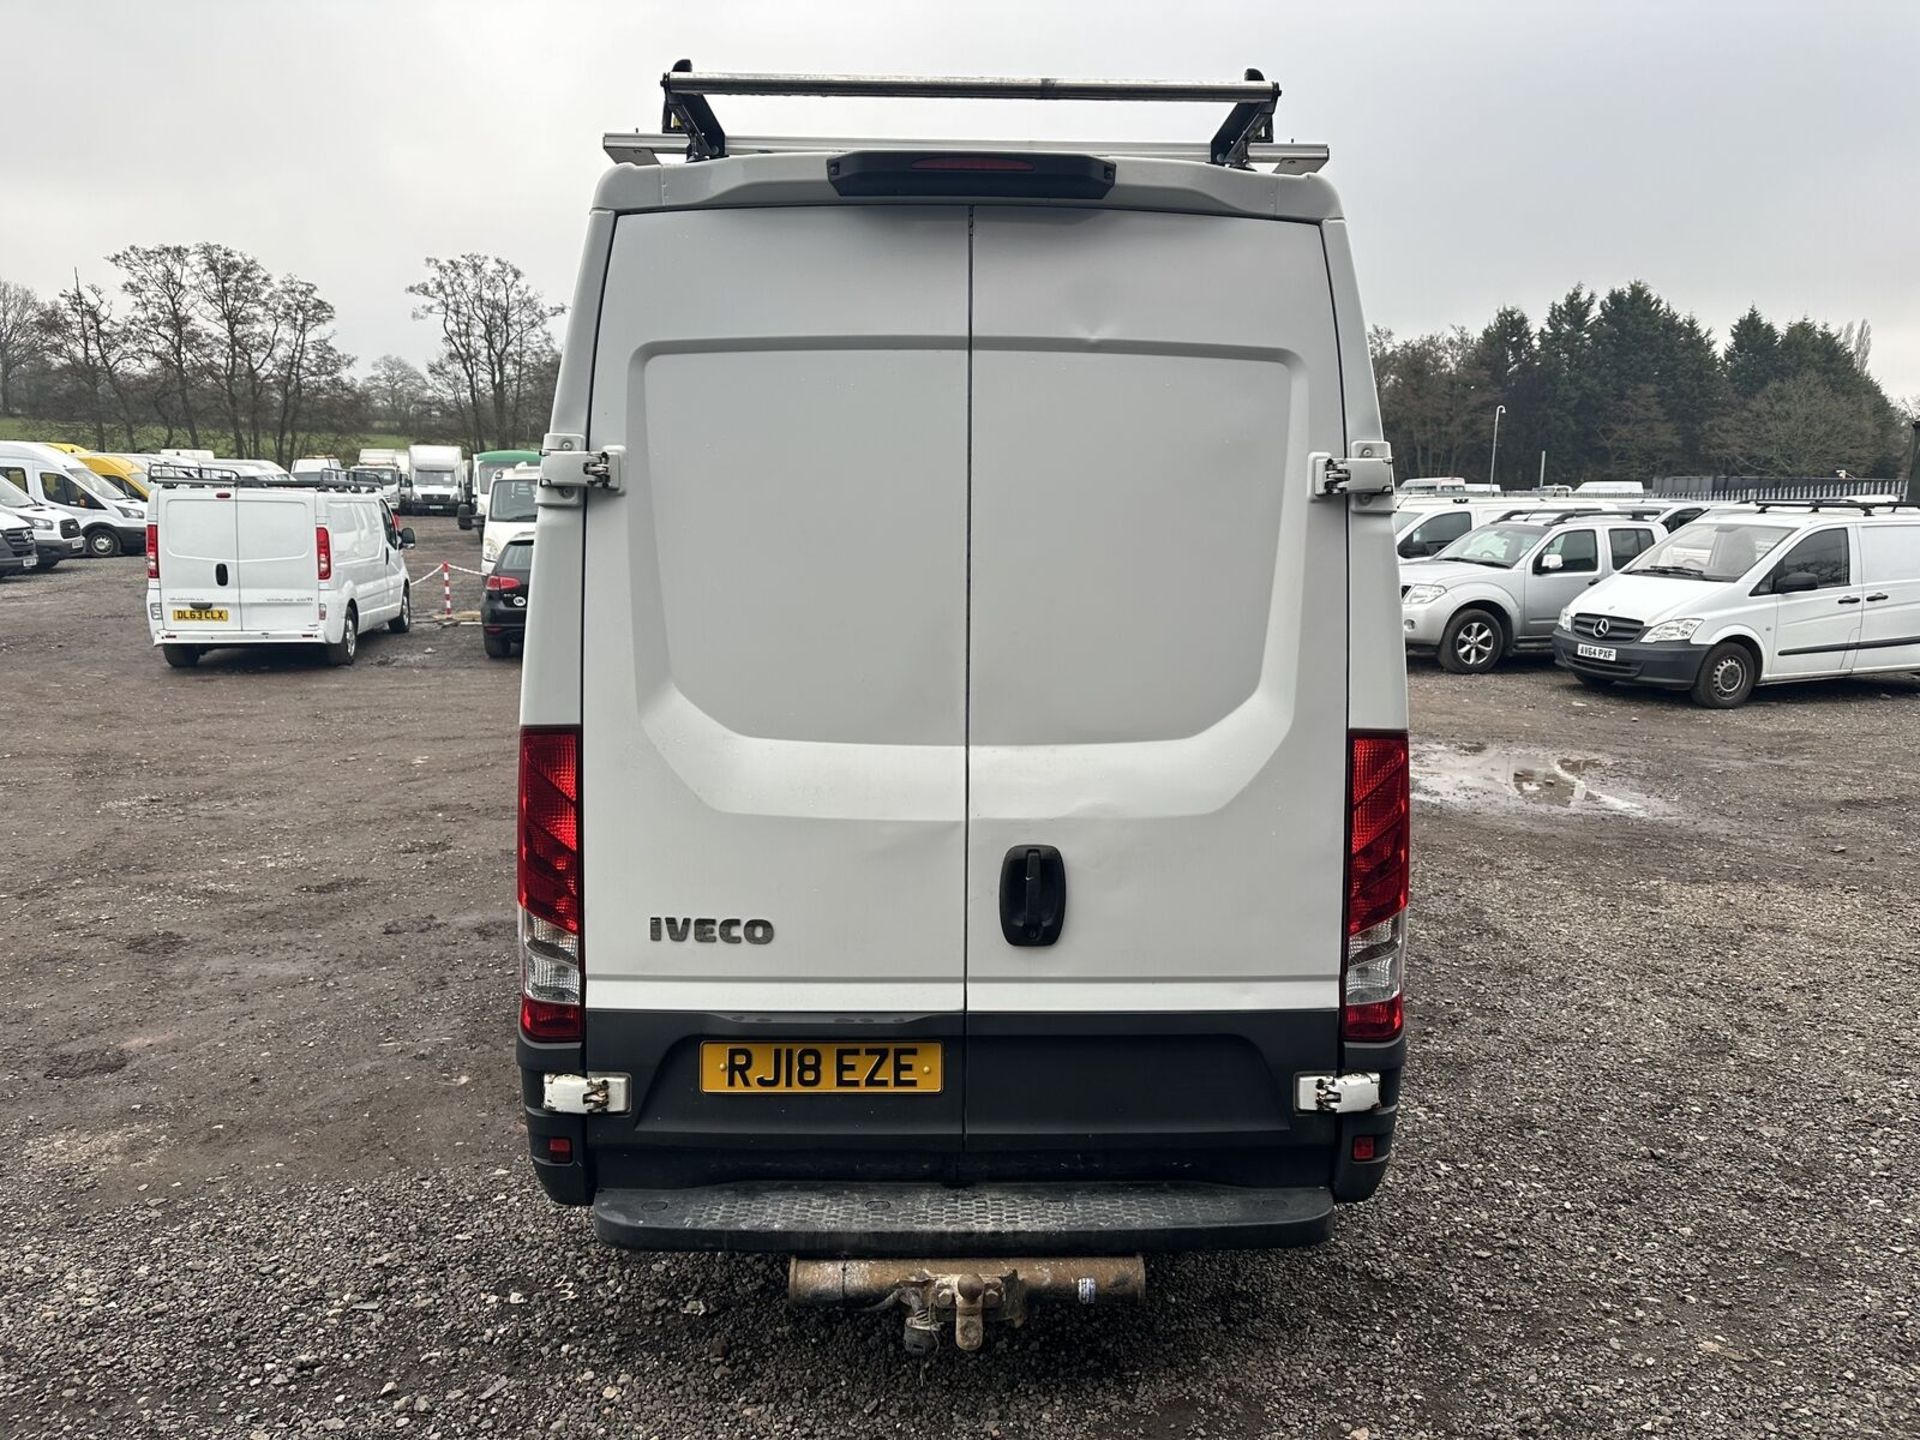 TURBO TROUBLE: 2018 IVECO DAILY HIGH ROOF VAN - ULEZ EURO 6 DEAL - Image 4 of 18